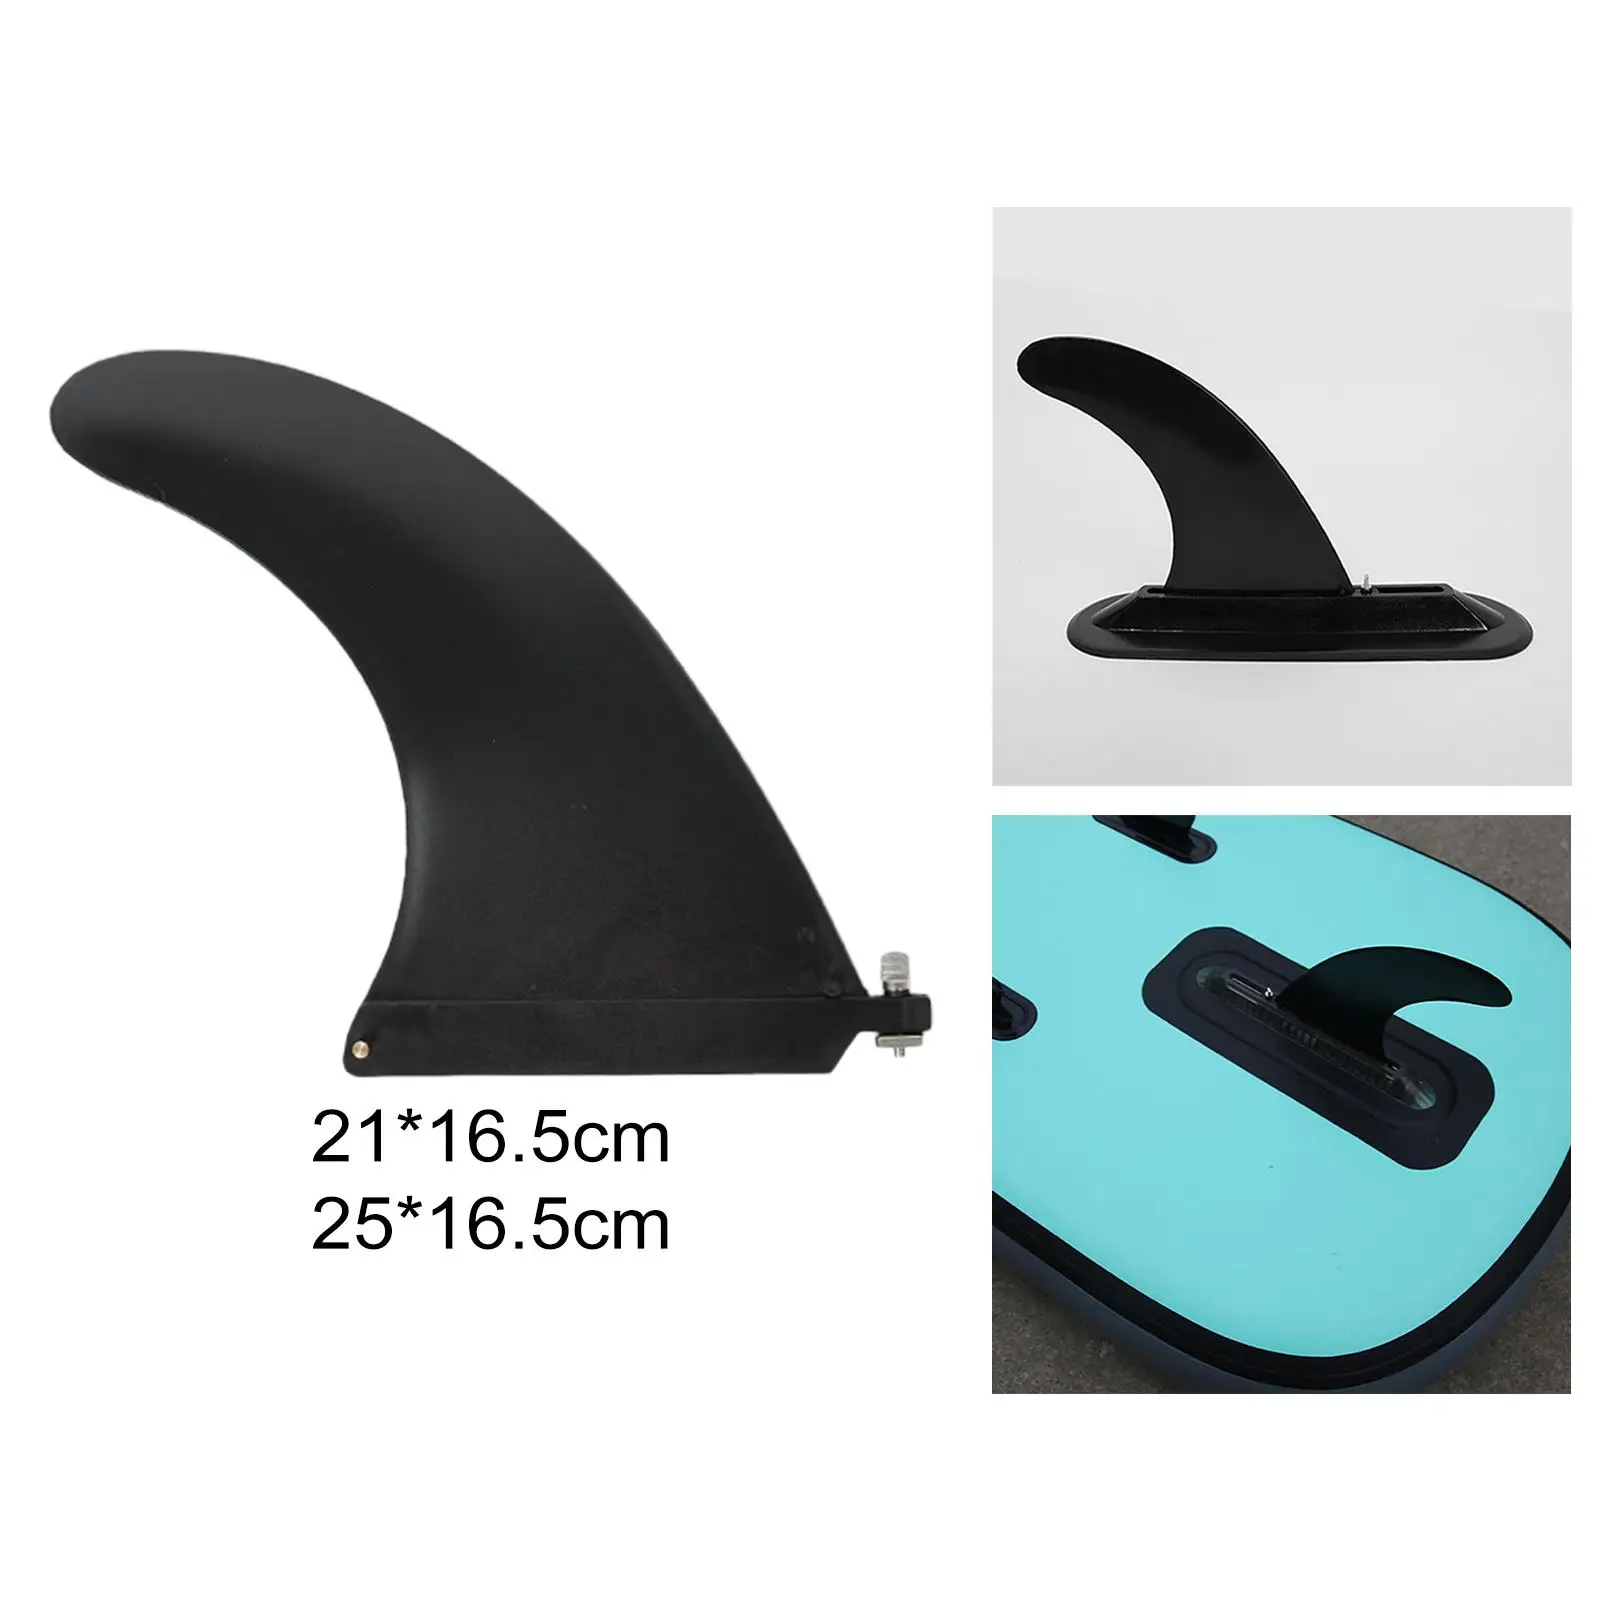 Surfboard Fin Surf Kayak Fin Replacement Durable Detachable Surfing Fin for Paddleboard Longboards Dinghy Water Sports